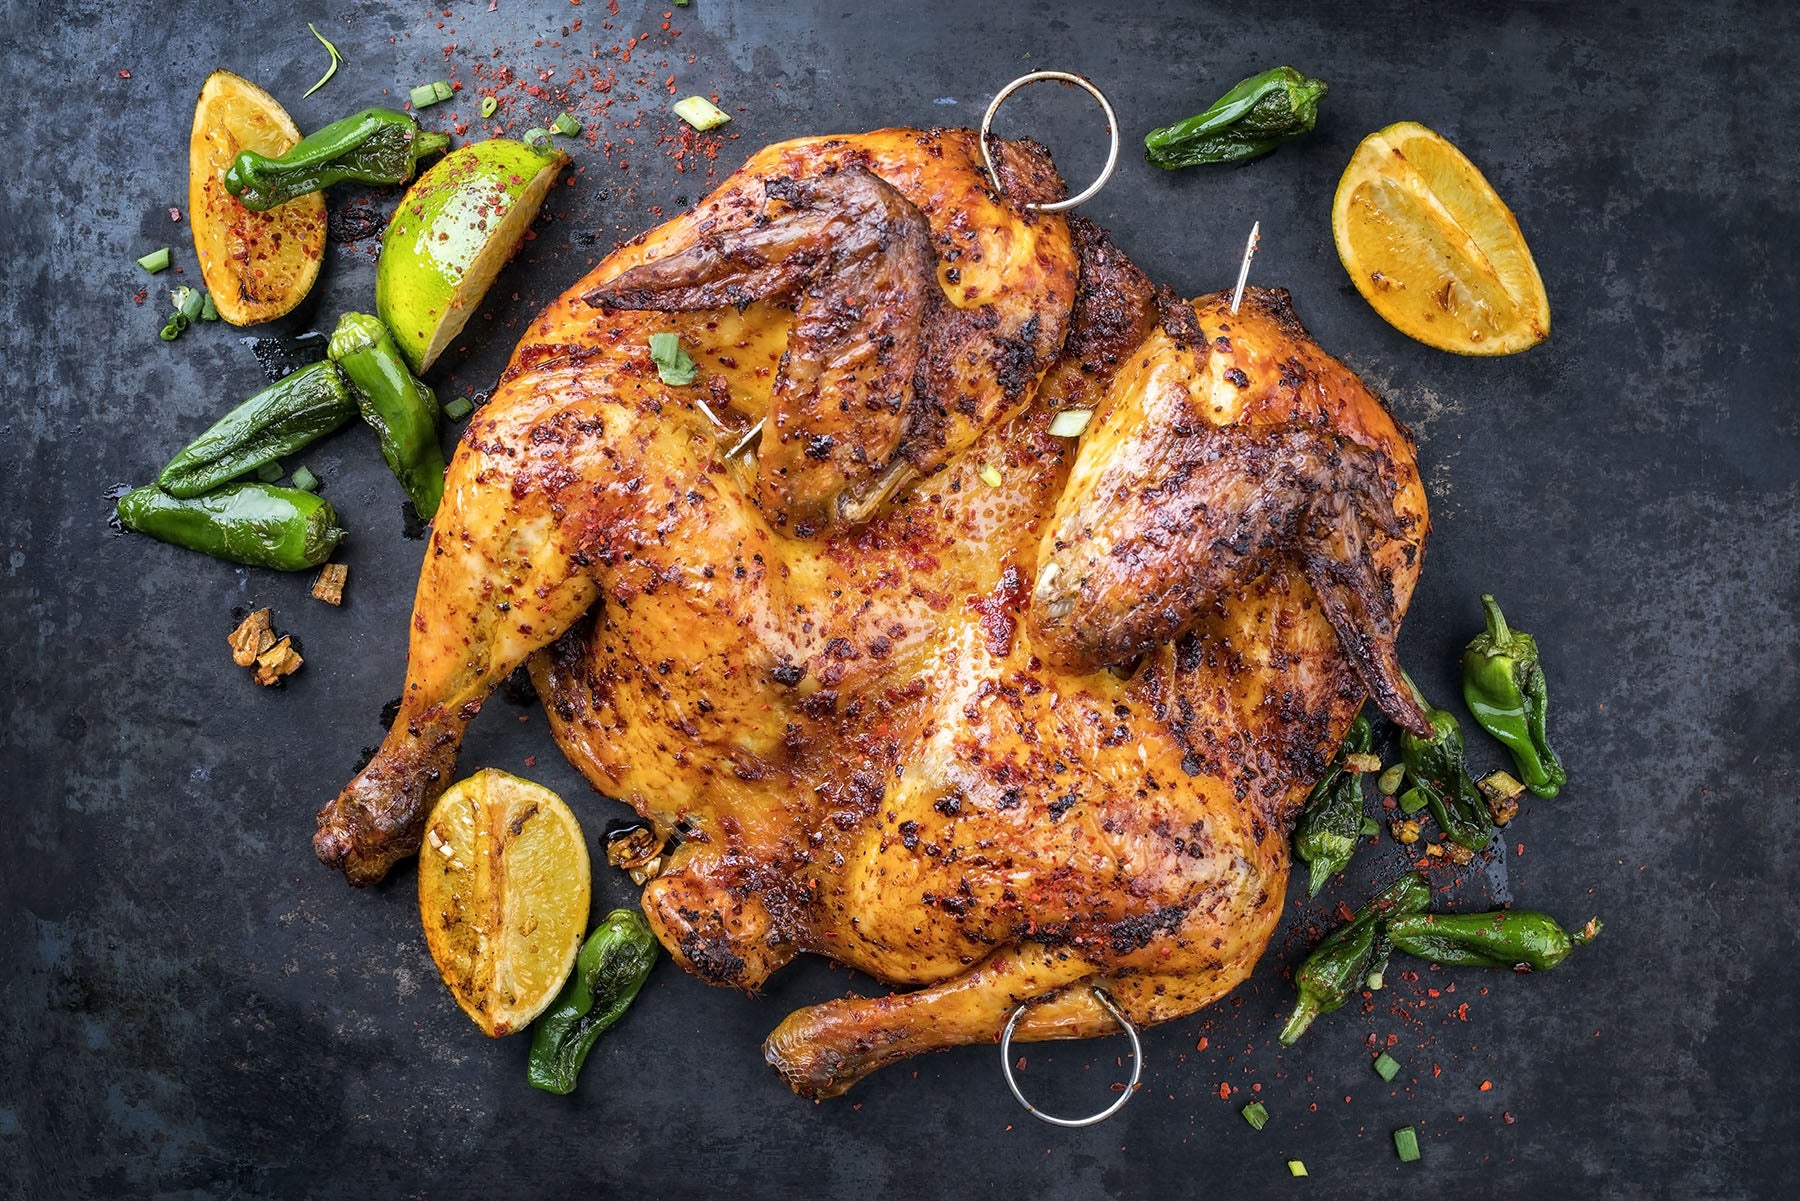 Lemon & Herb Spatchcock Whole Chicken